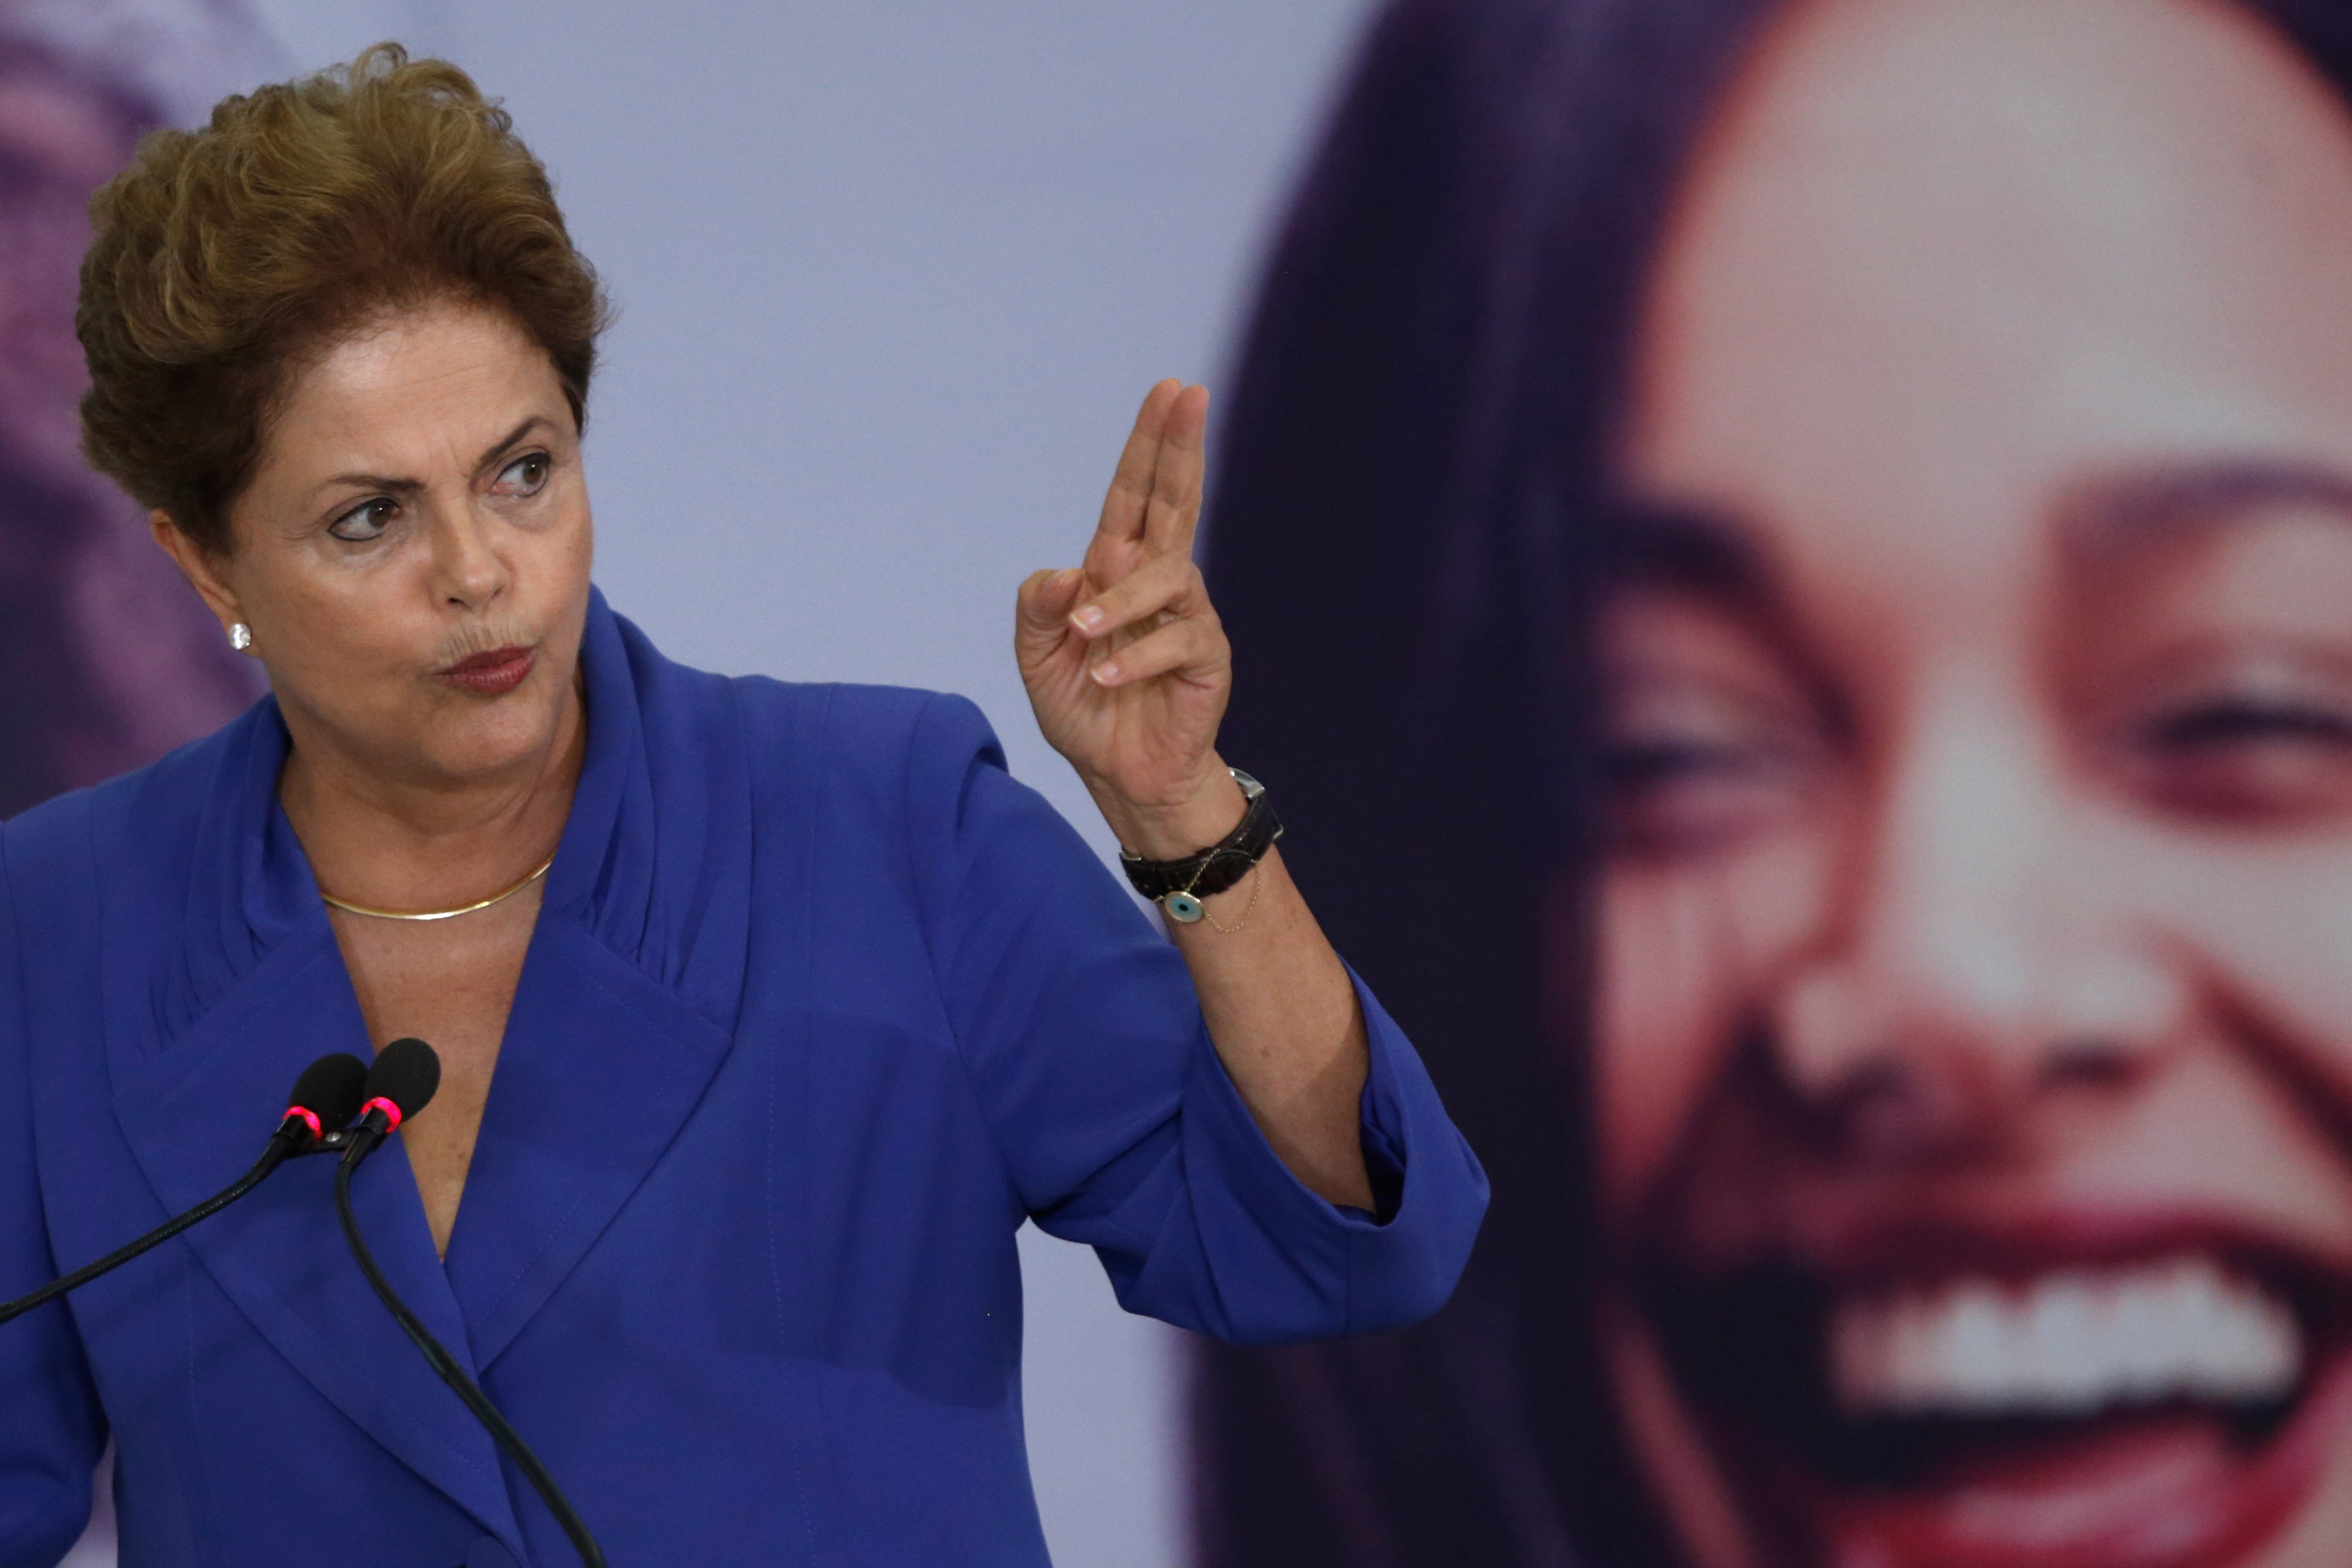 Brazil's President Dilma Rousseff speaks during a signing ceremony for a harsher law against femicide, at the Planalto Presidential Palace in Brasilia, Brazil, March 9, 2015. (Eraldo Peres&amp;mdash;AP)